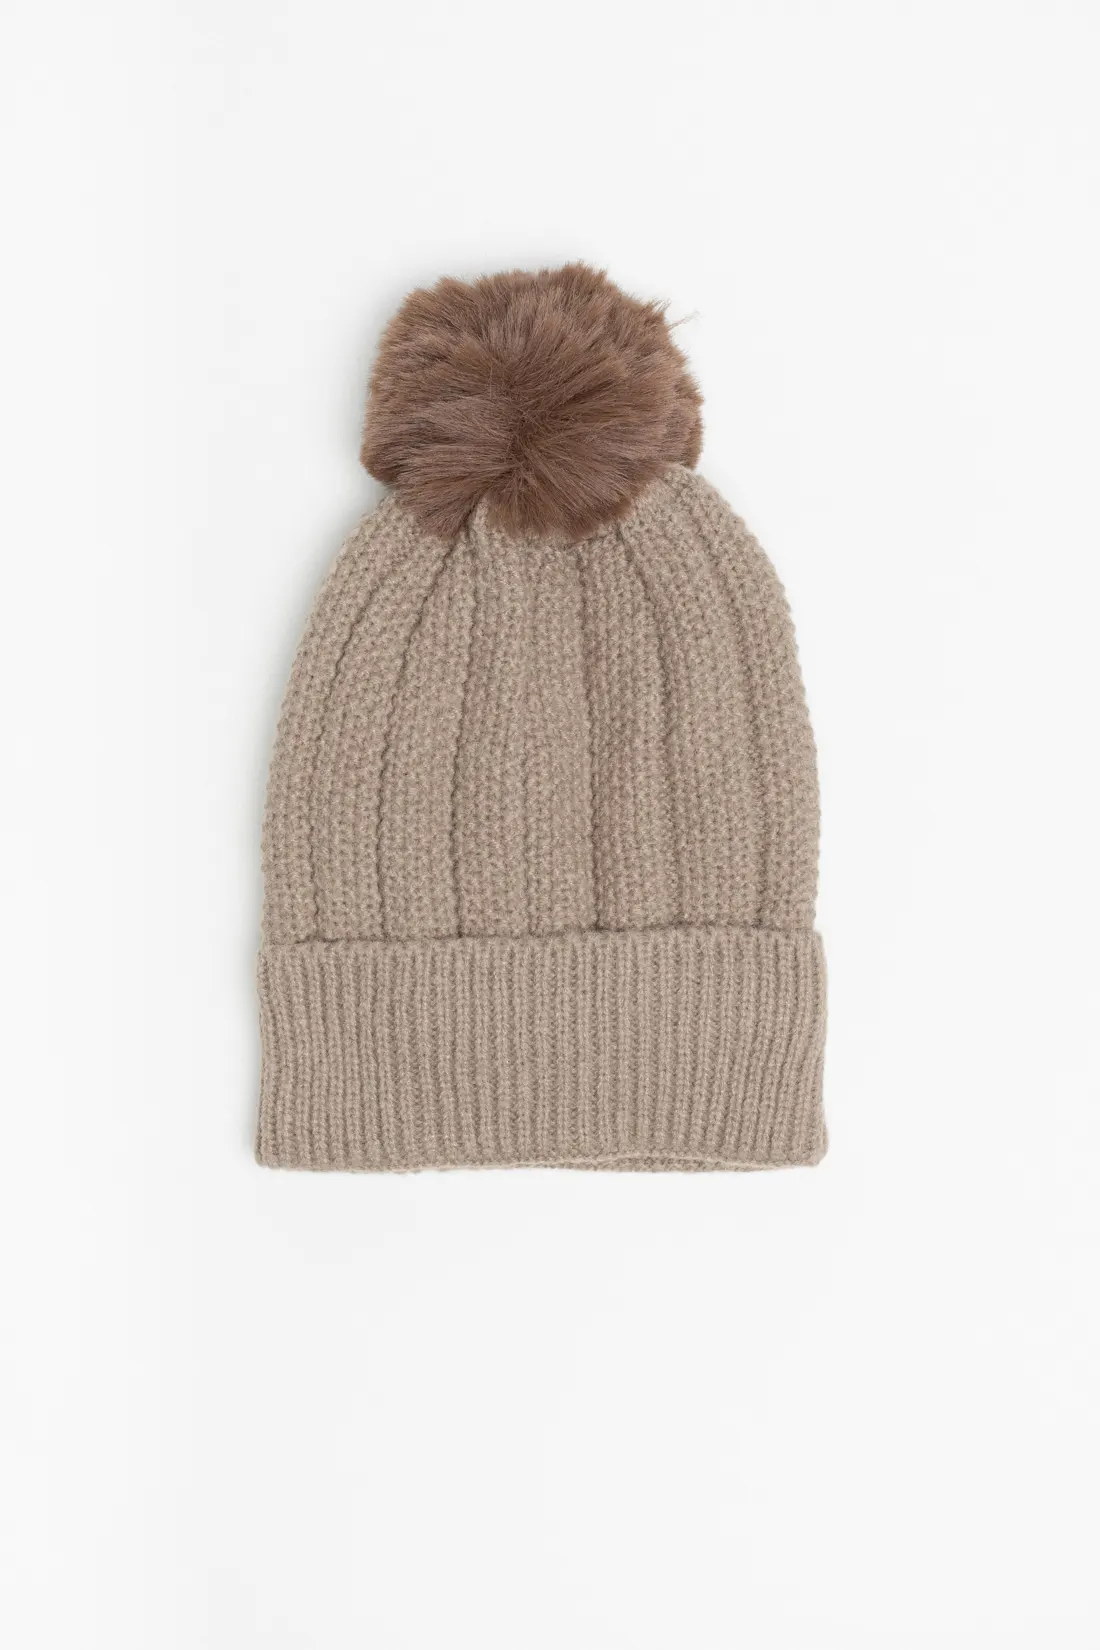 MAIPO HAT - TAUPE